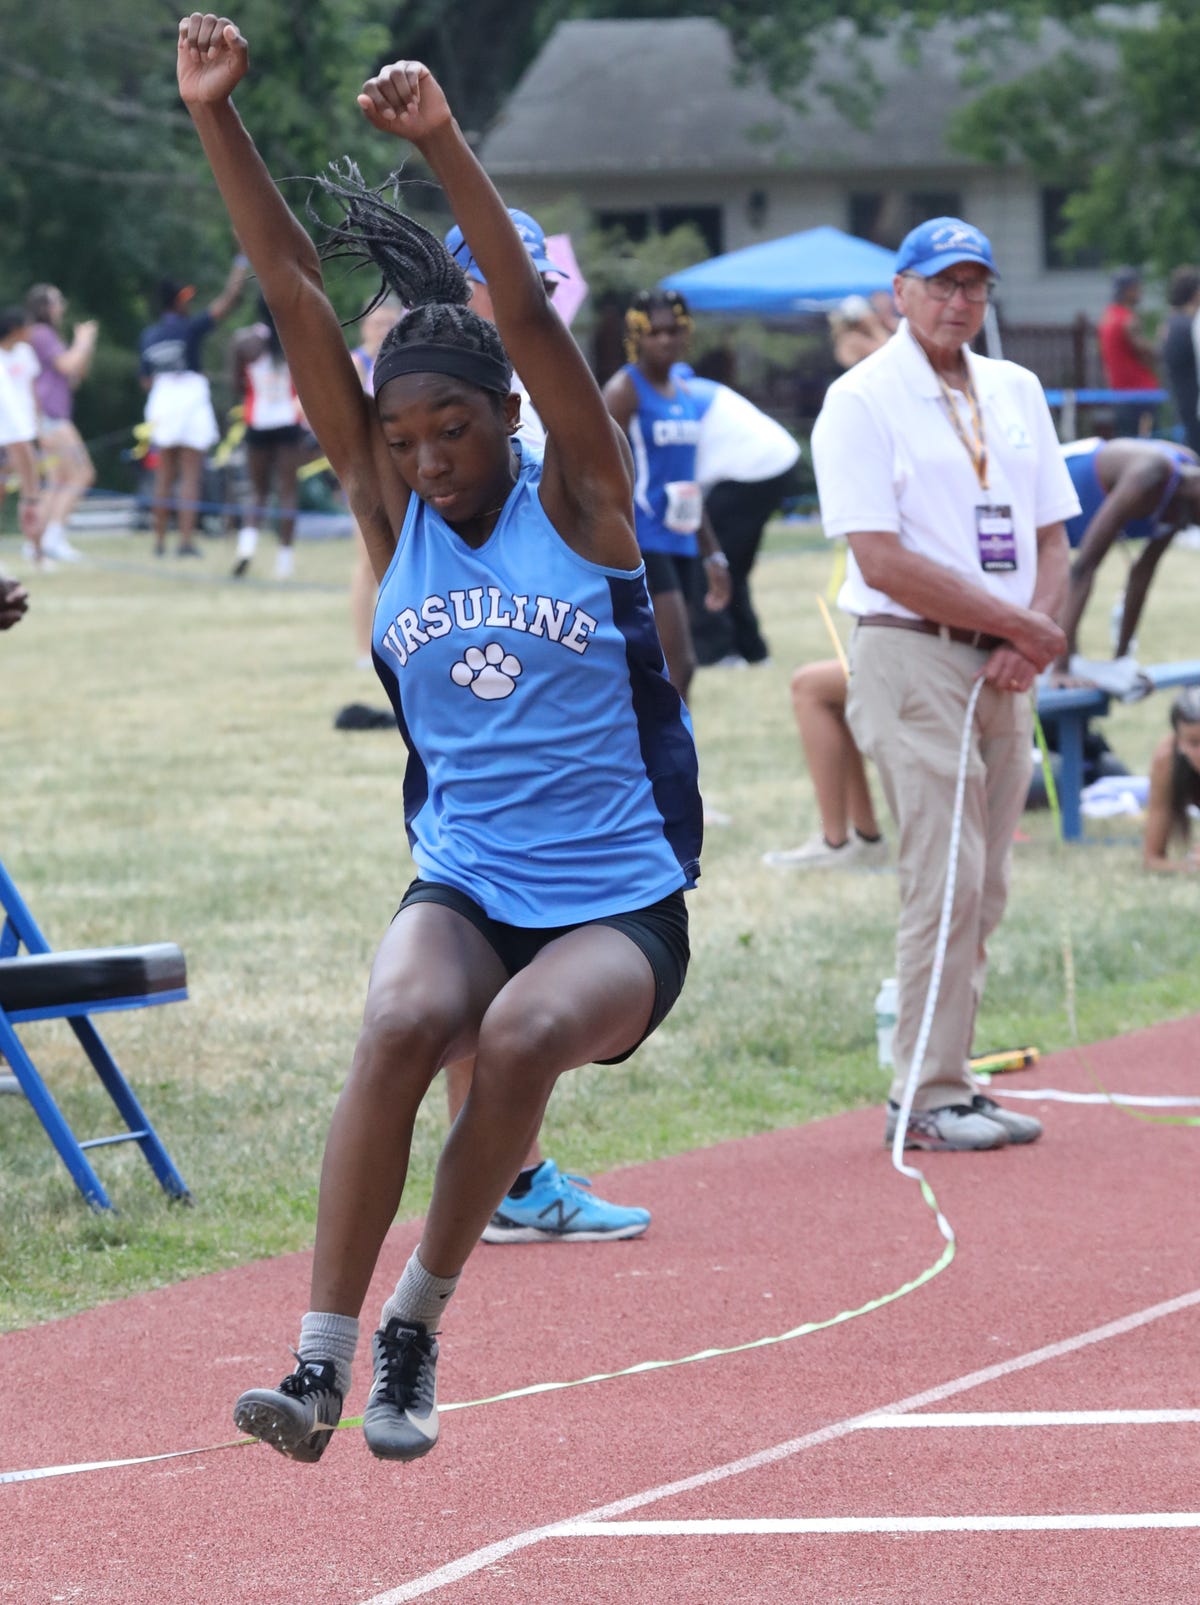 Ursuline’s Sarai Sealy: Track Star Named Con Edison Athlete of the Week